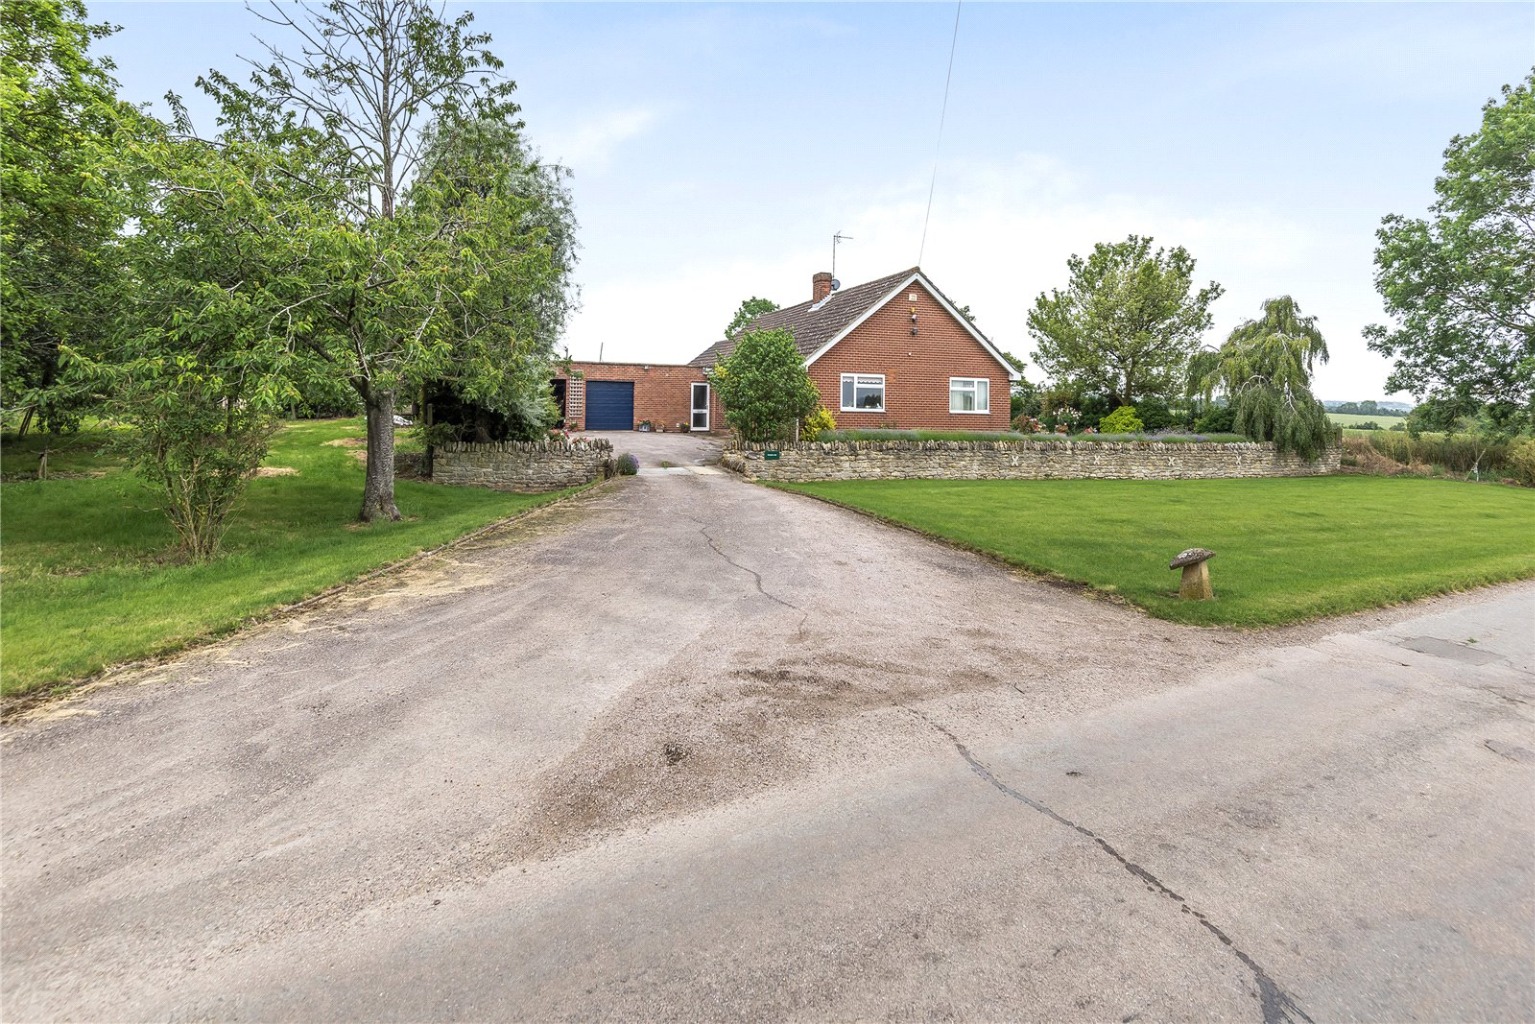 3 bed detached house for sale in Wintringham, St. Neots  - Property Image 1